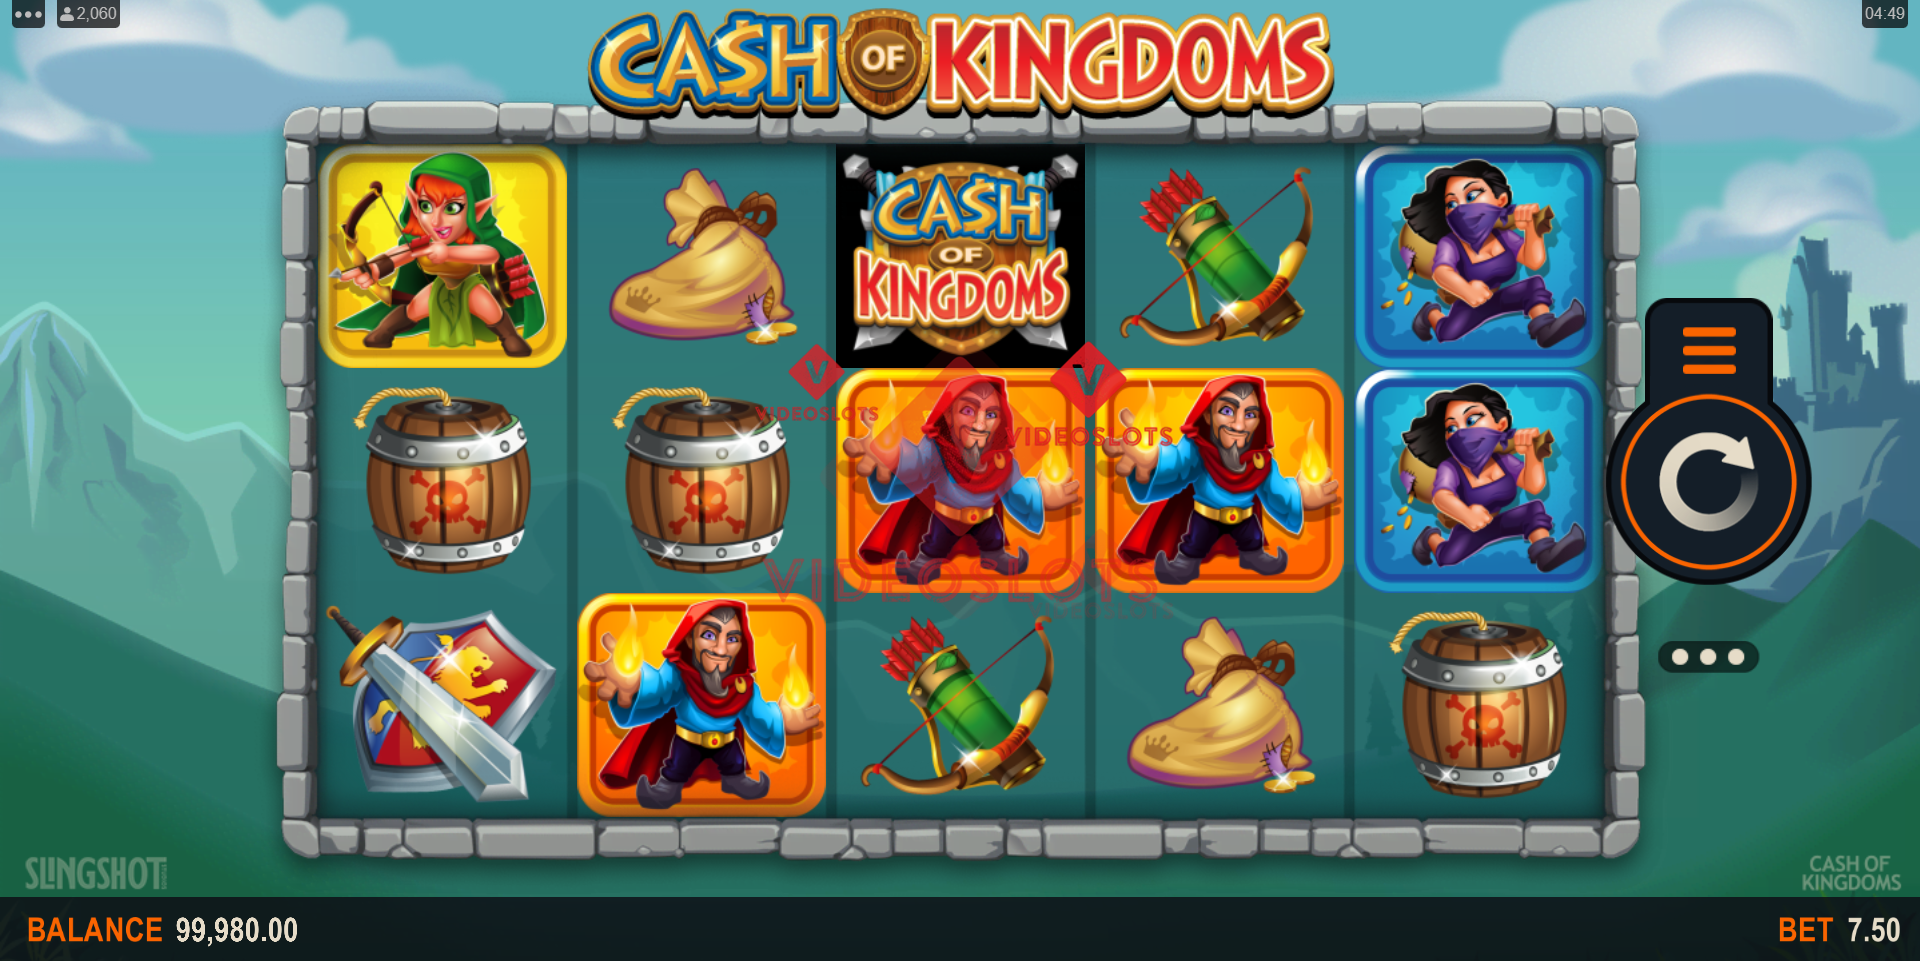 Base Game for Cash of Kingdoms slot for Microgaming